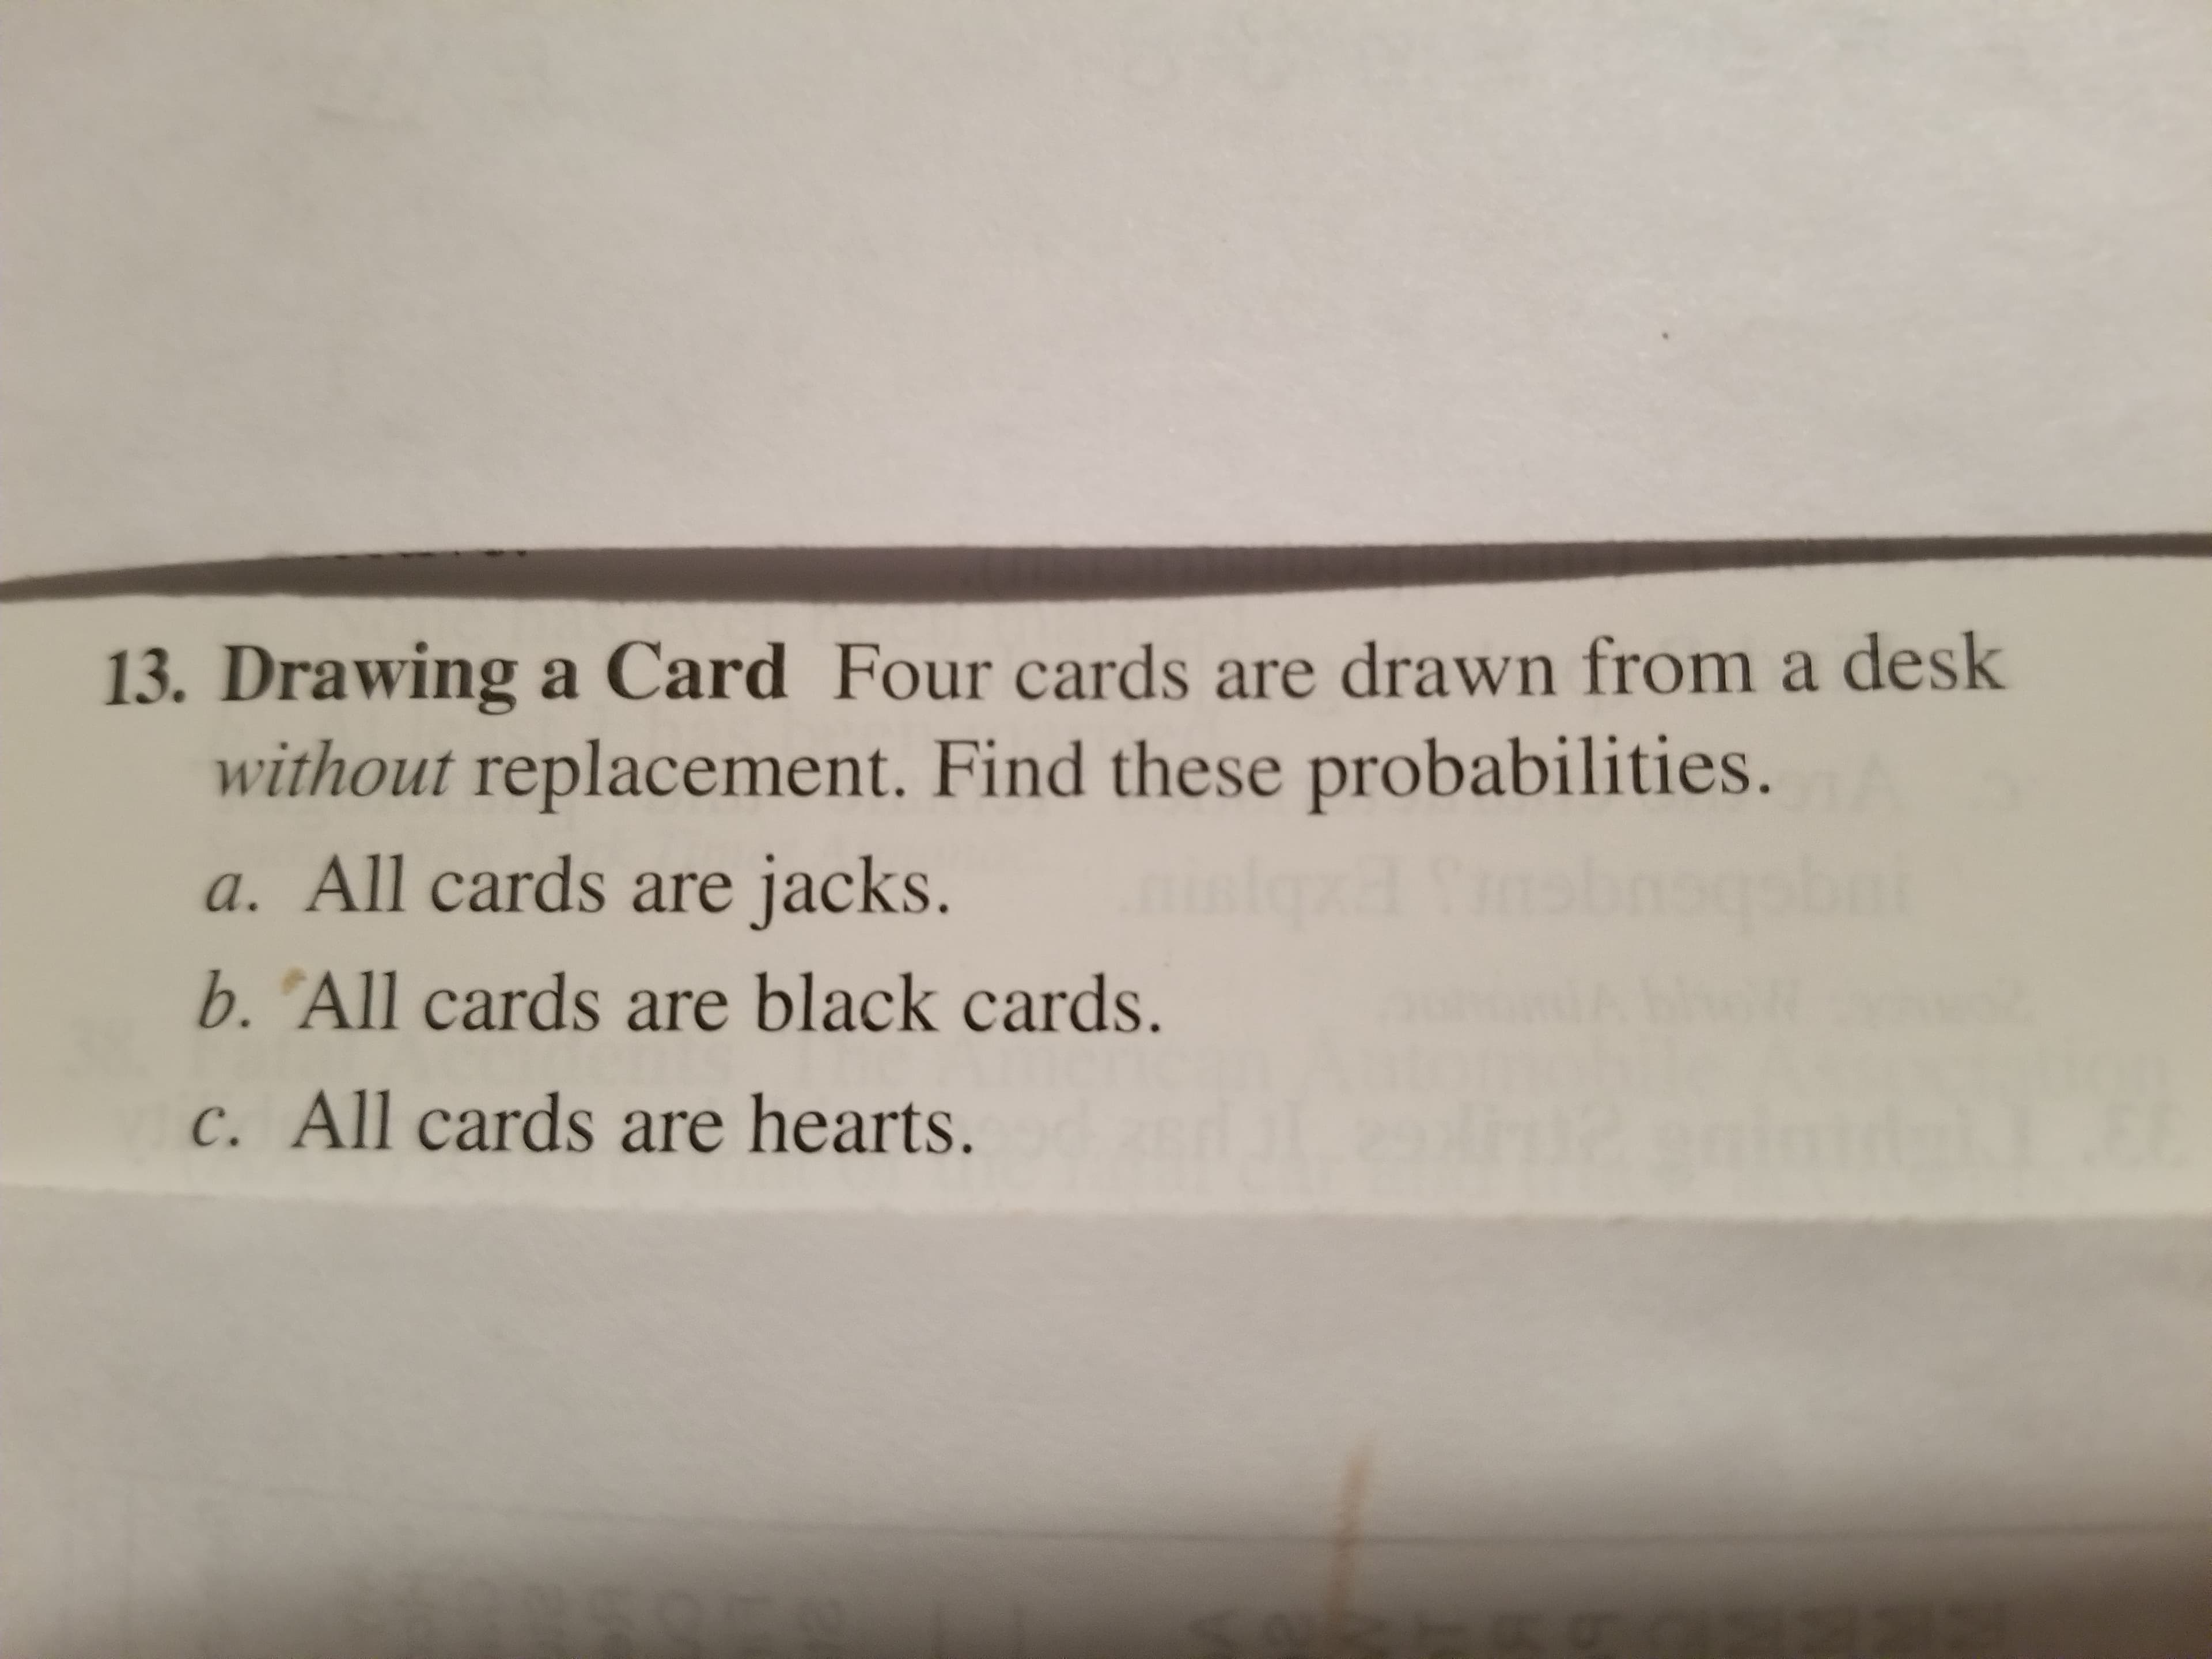 13. Drawing a Card Four cards are drawn from a desk
without replacement. Find these probabilities.
a. All cards are jacks.
b. "All cards are black cards.
c. All cards are hearts.
